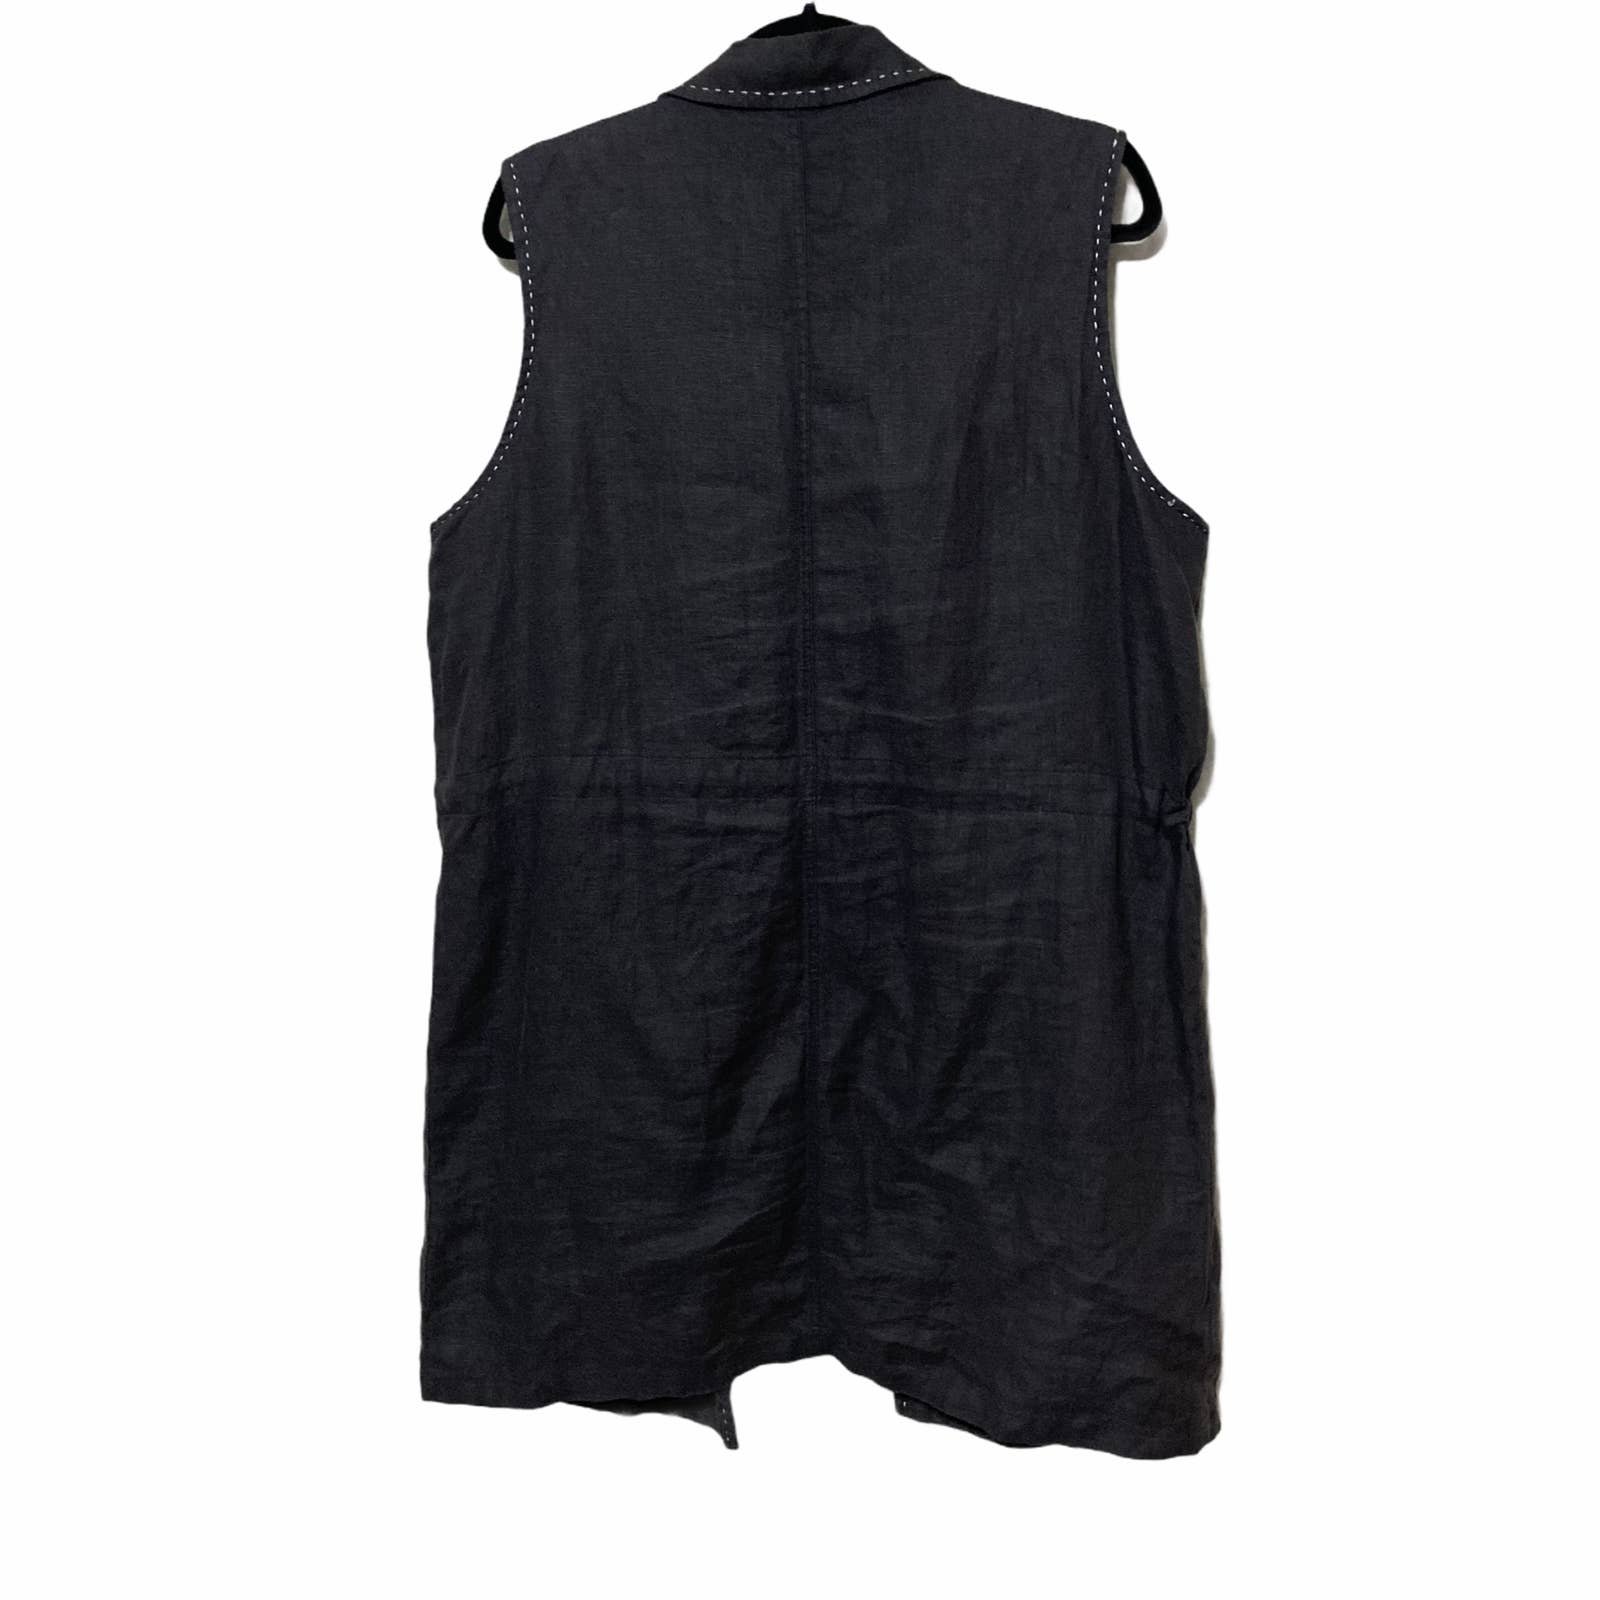 Exclusive Simple And Light Sack Cloth Vest Upcycle OomJXOVWg Novel 